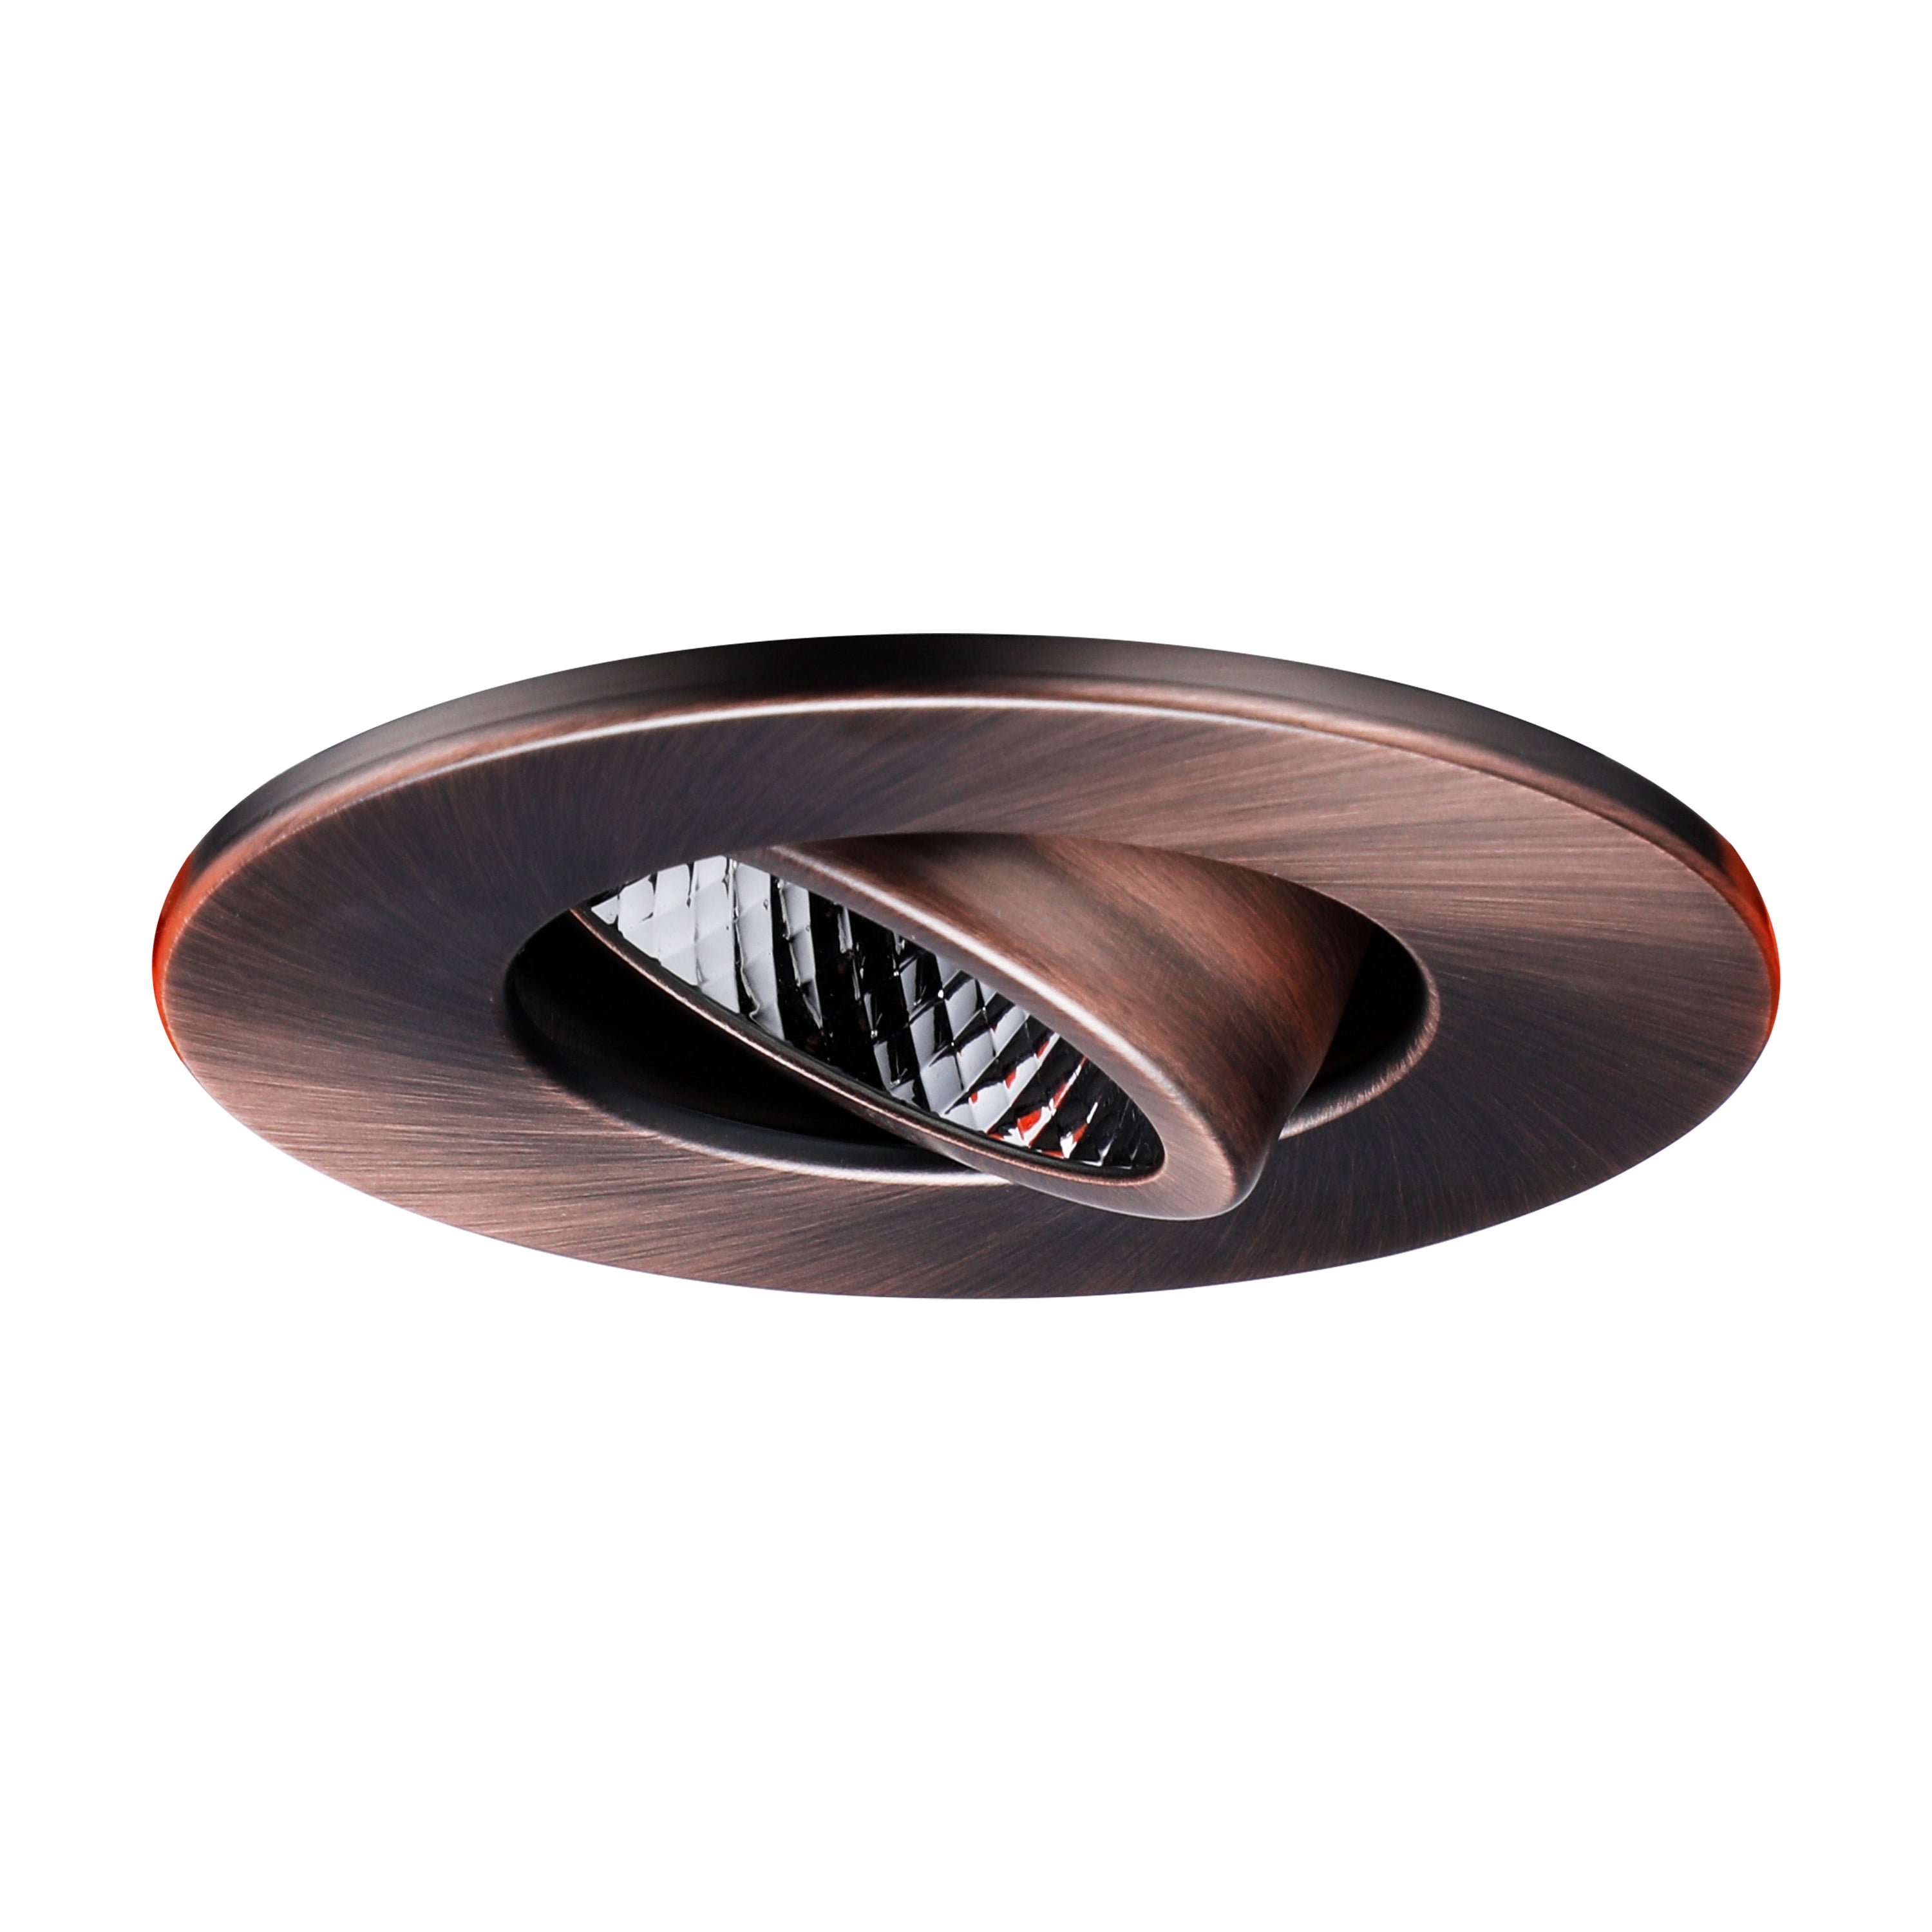 Circulex 3" Gimbal LED Recessed Light - Oil Rubbed Bronze - 7W - Single CCT